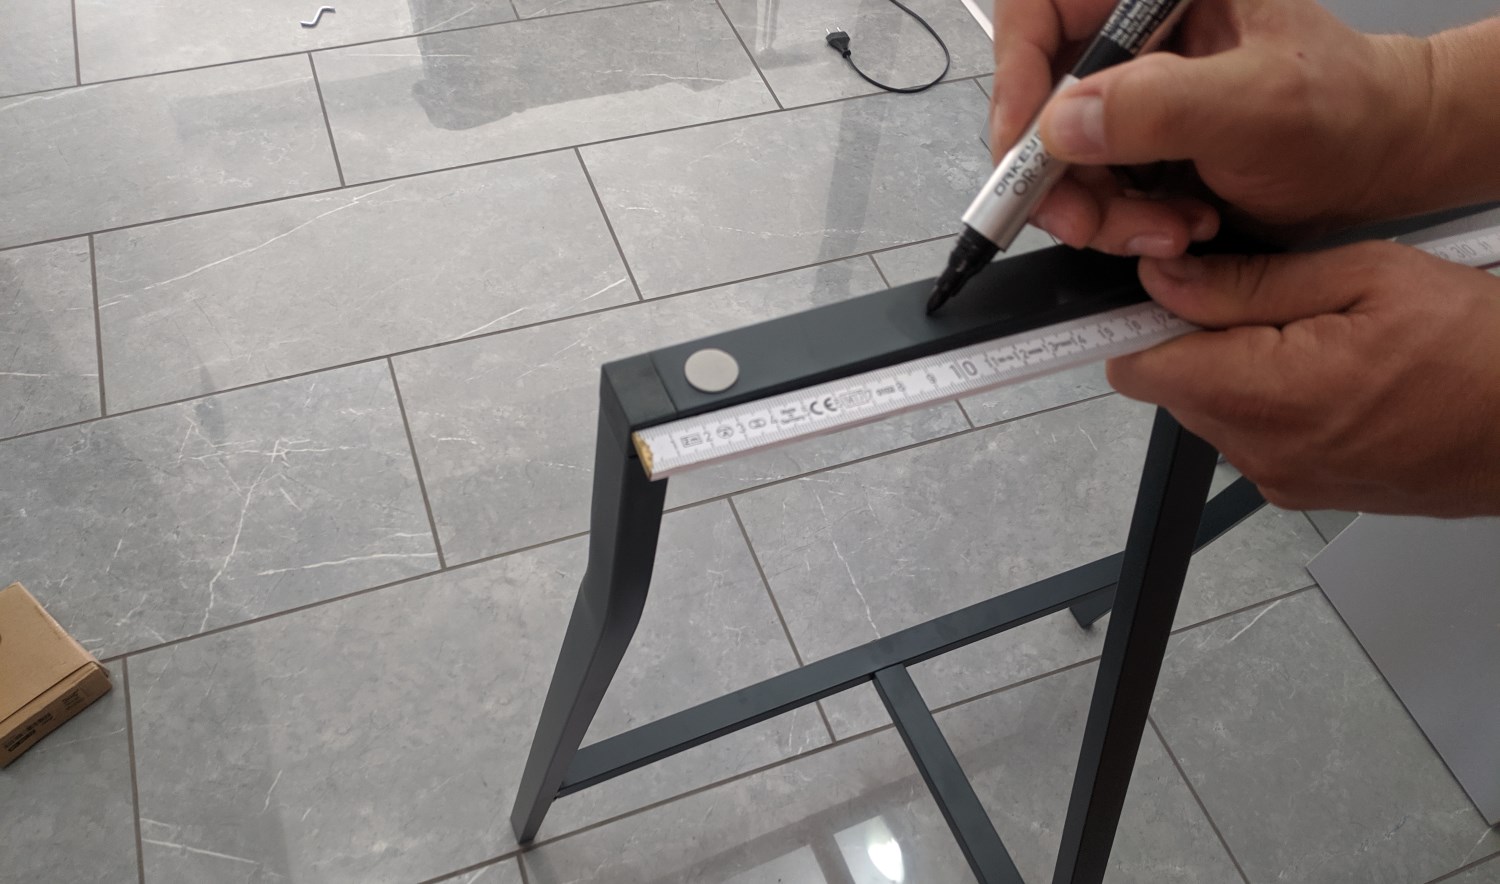 Marking the location for the mounting holes